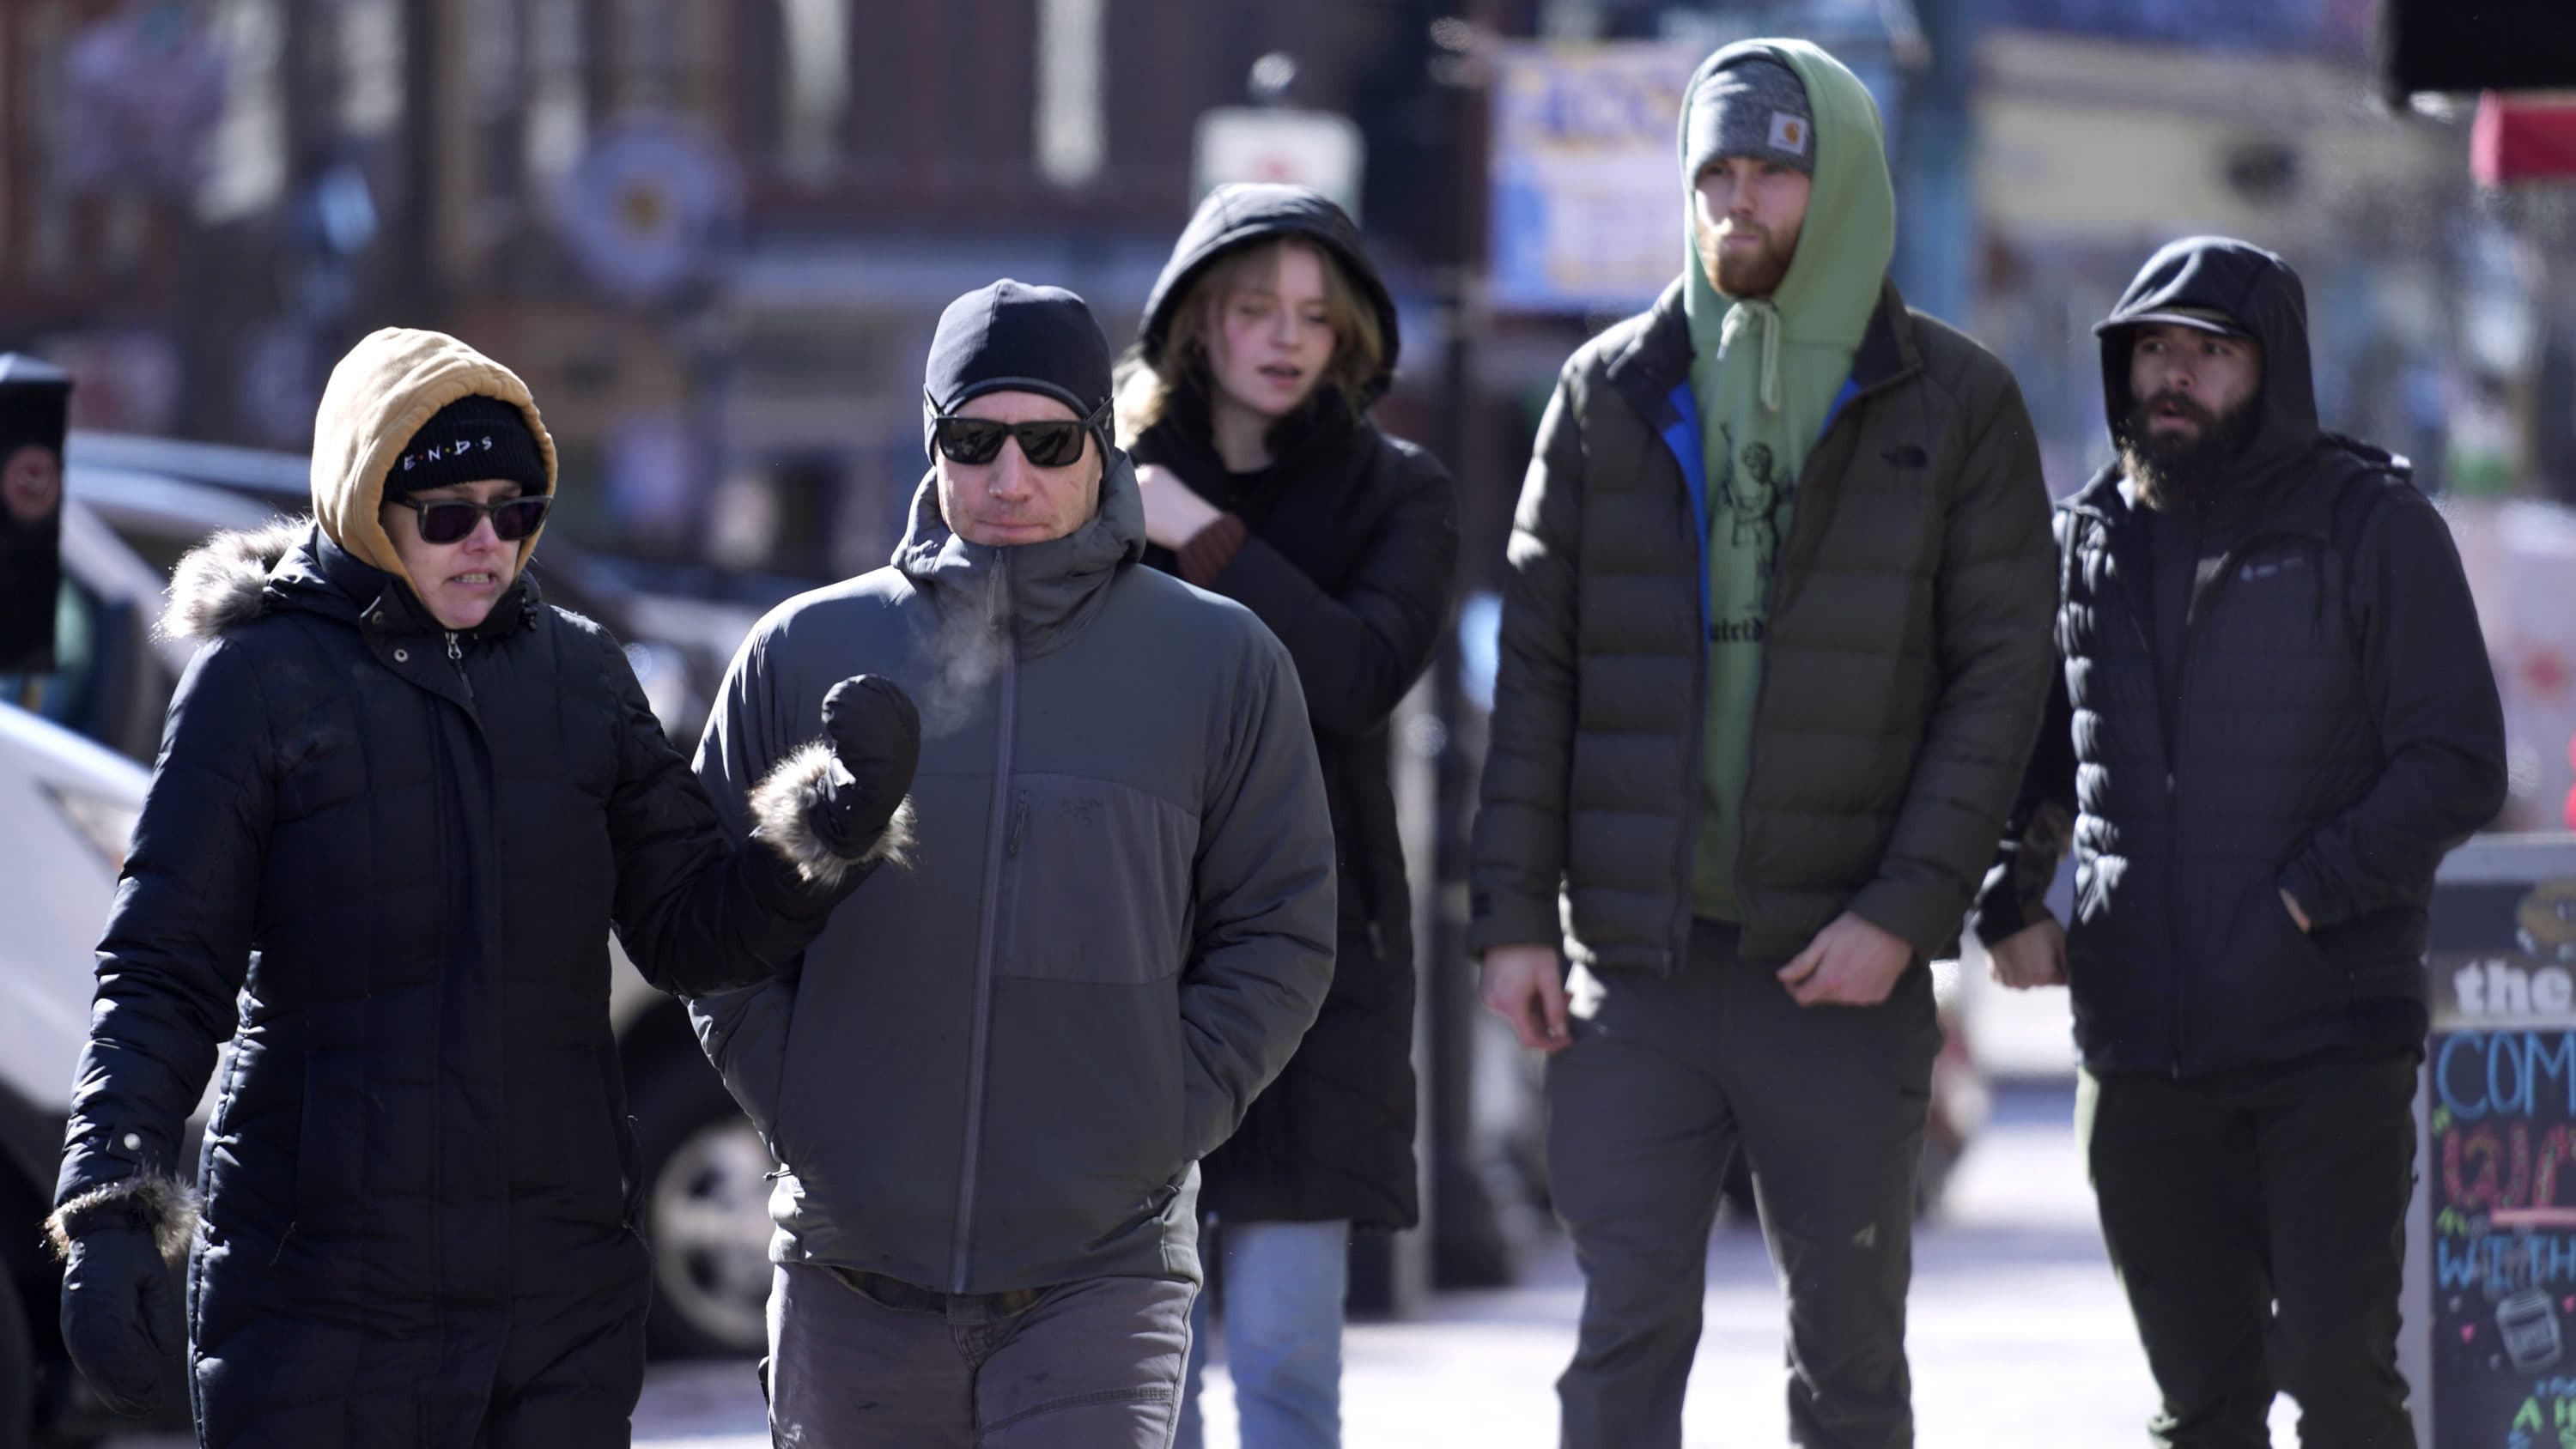 Pedestrians are bundled up in cold weather clothing while walking during a frigid weather snap, Friday, Feb. 3, 2023, in Portsmouth, N.H. (Charles Krupa/AP)